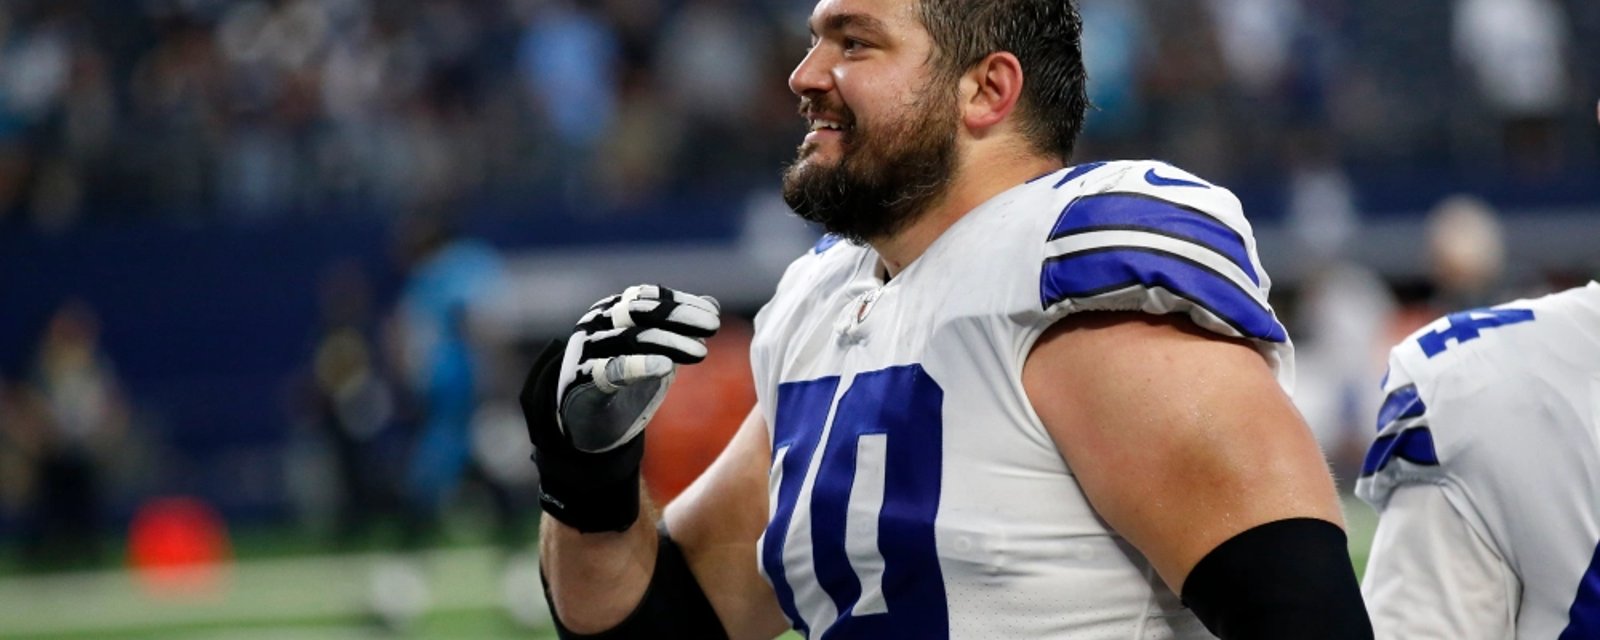 Major breakthrough in Cowboys holdout Zack Martin's situation 